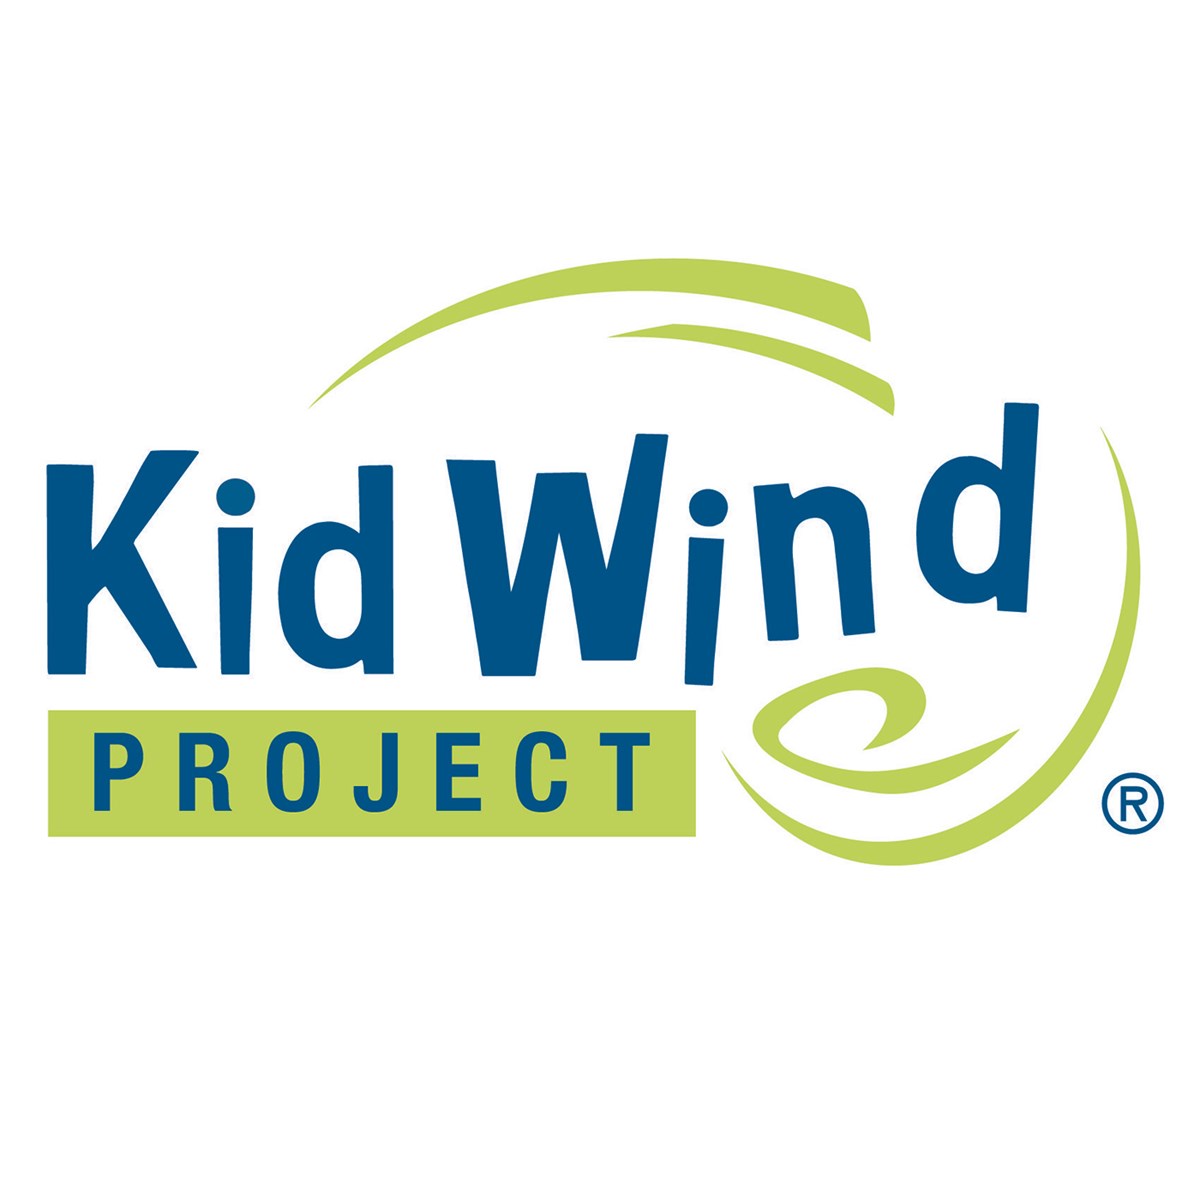 KidWind has been helping students and teachers learn about wind energy for 15 years. The KidWind Project provide curriculum, workshops, and hands-on experimentation kits for educators.